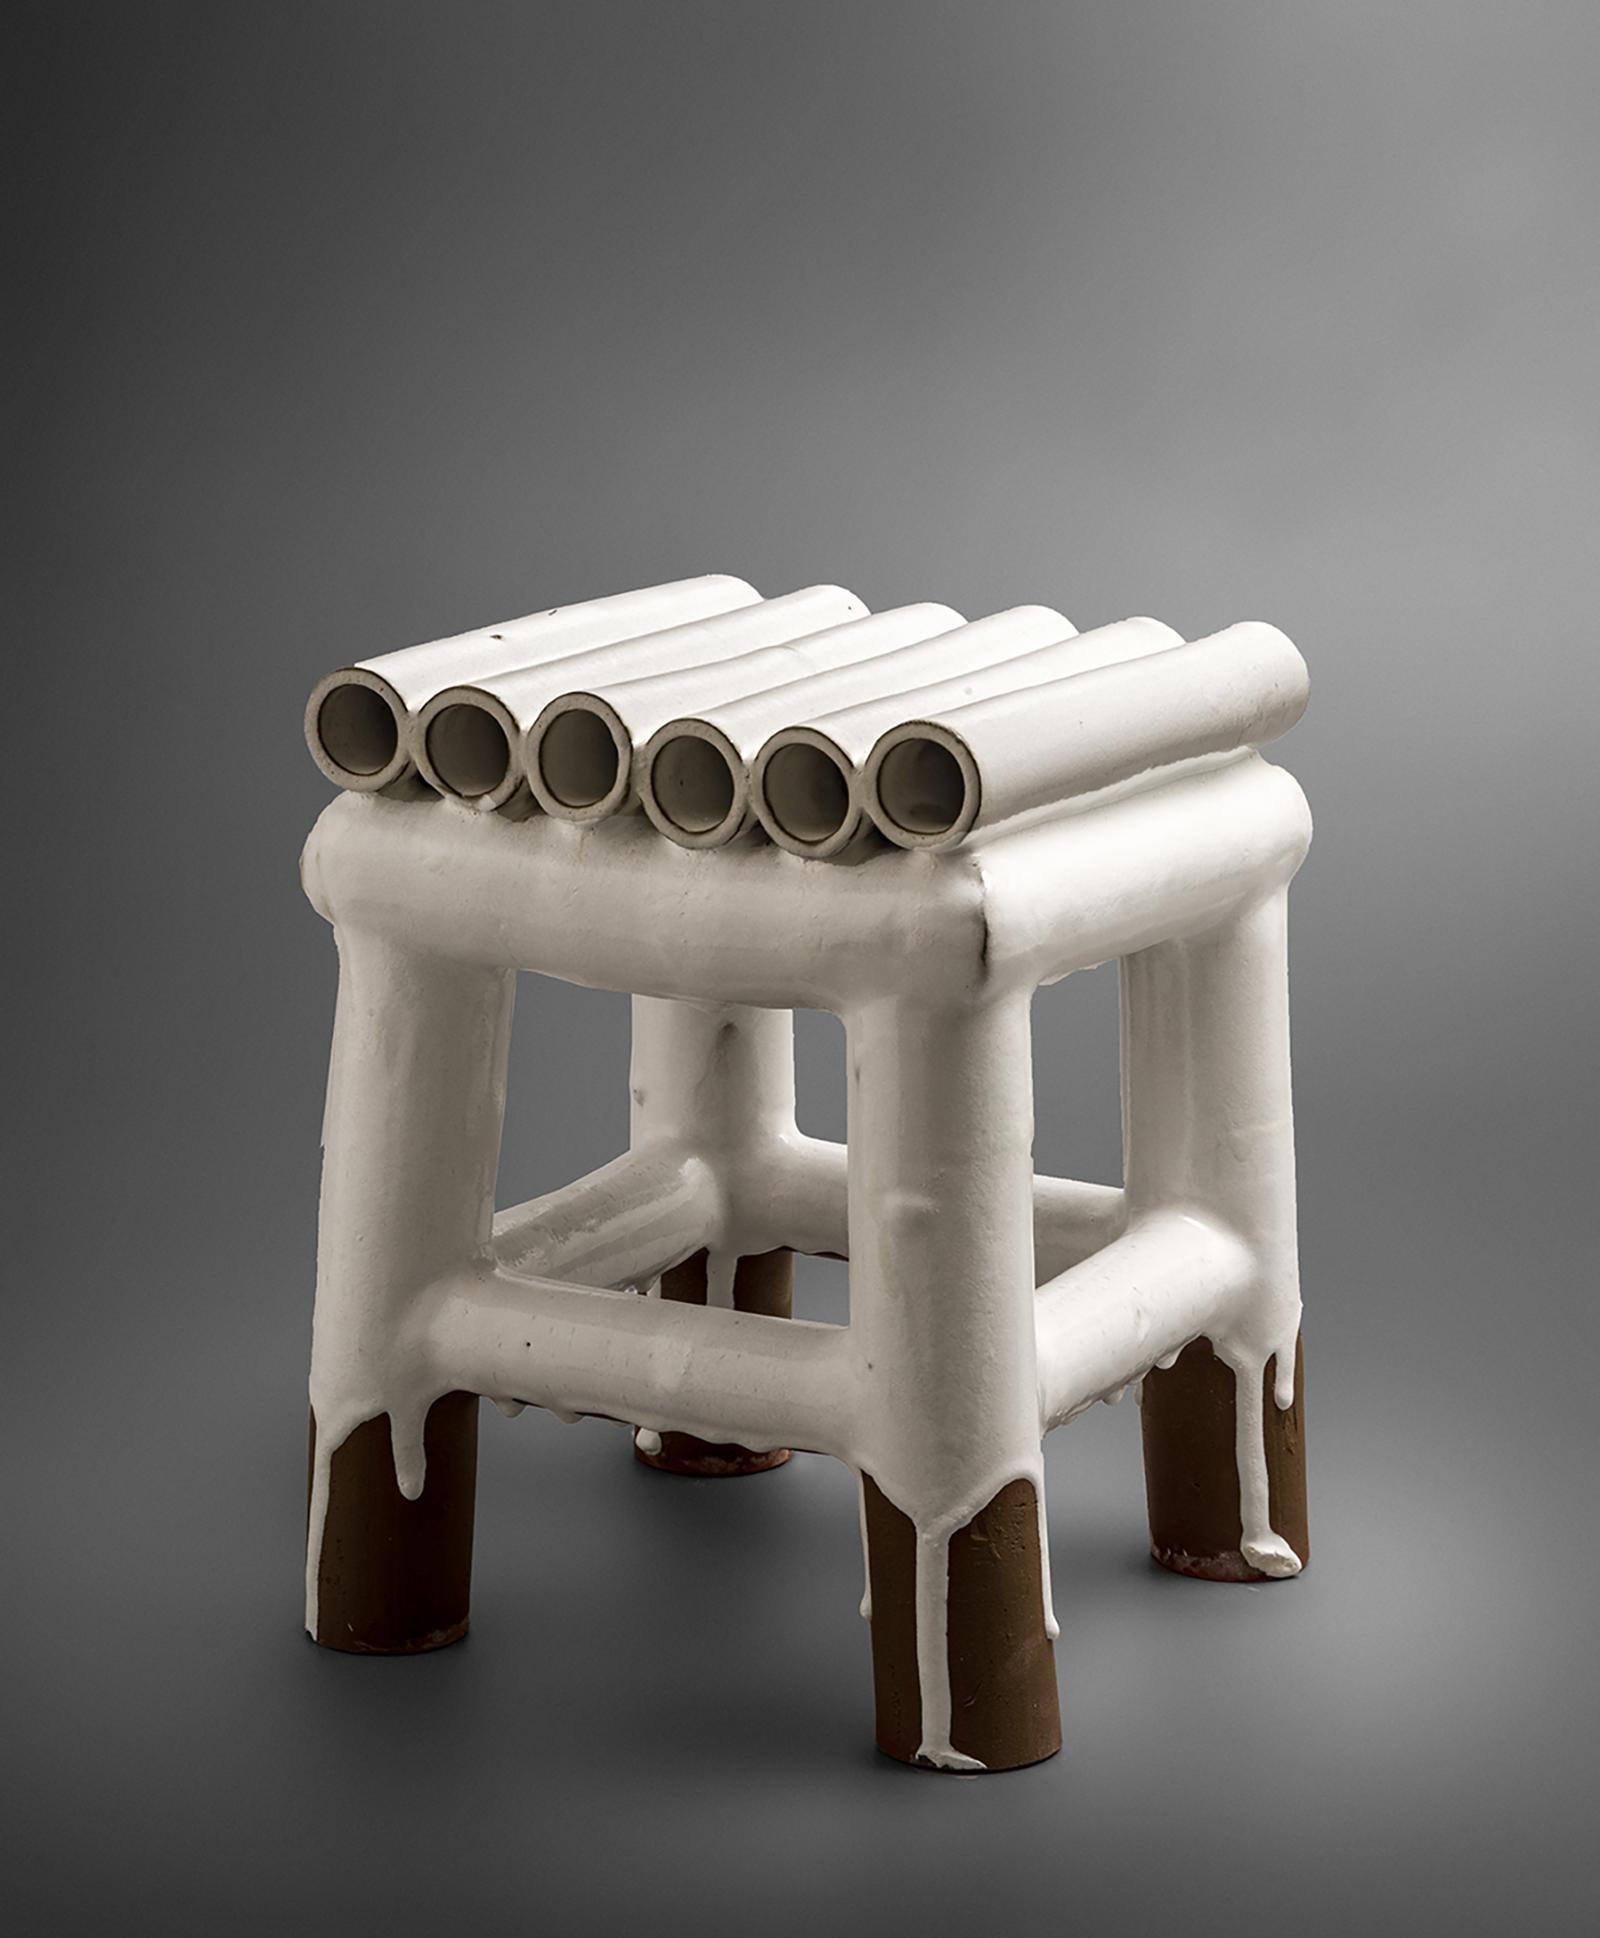 White stool by Milan Pekar
Dimensions: 35 x 35 x 40 cm
Materials: stoneware with salt glaze

Hand-made in the Czech Republic. 
Also available in different colors.

Stoneware with salt glaze.

Established own studio August 2009 – Focus